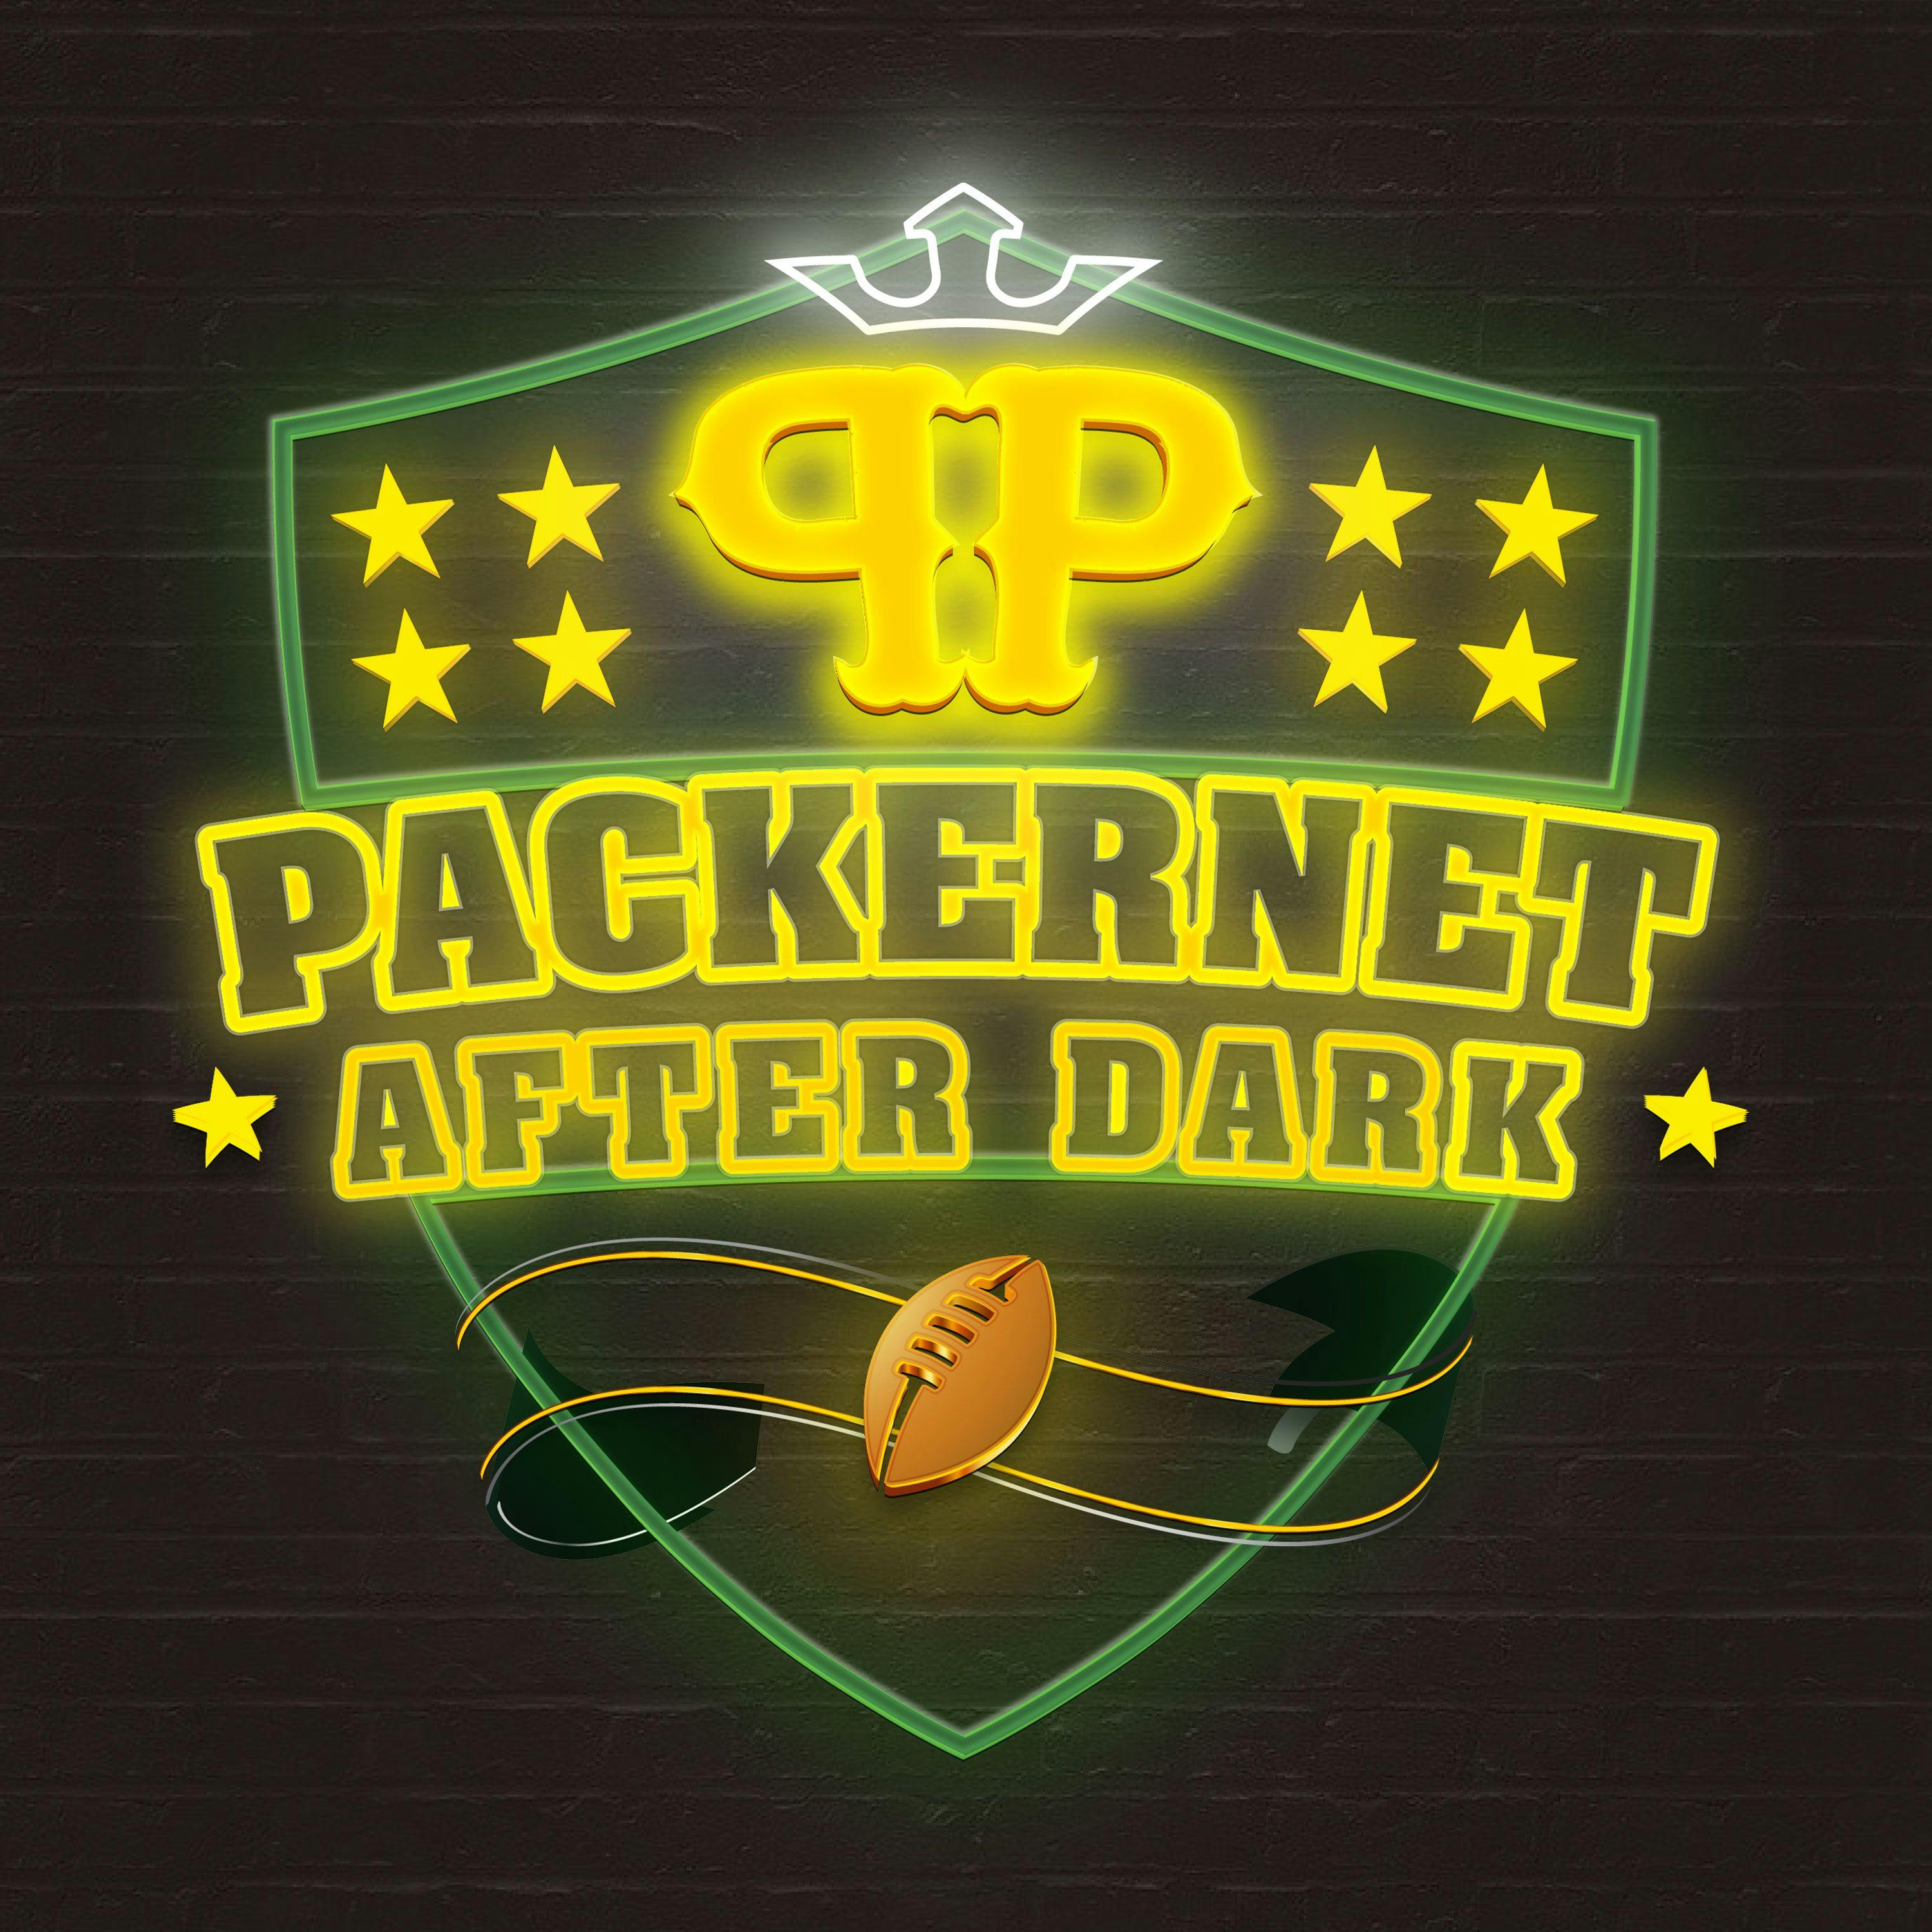 Packernet After Dark: Packers Newest Tackle